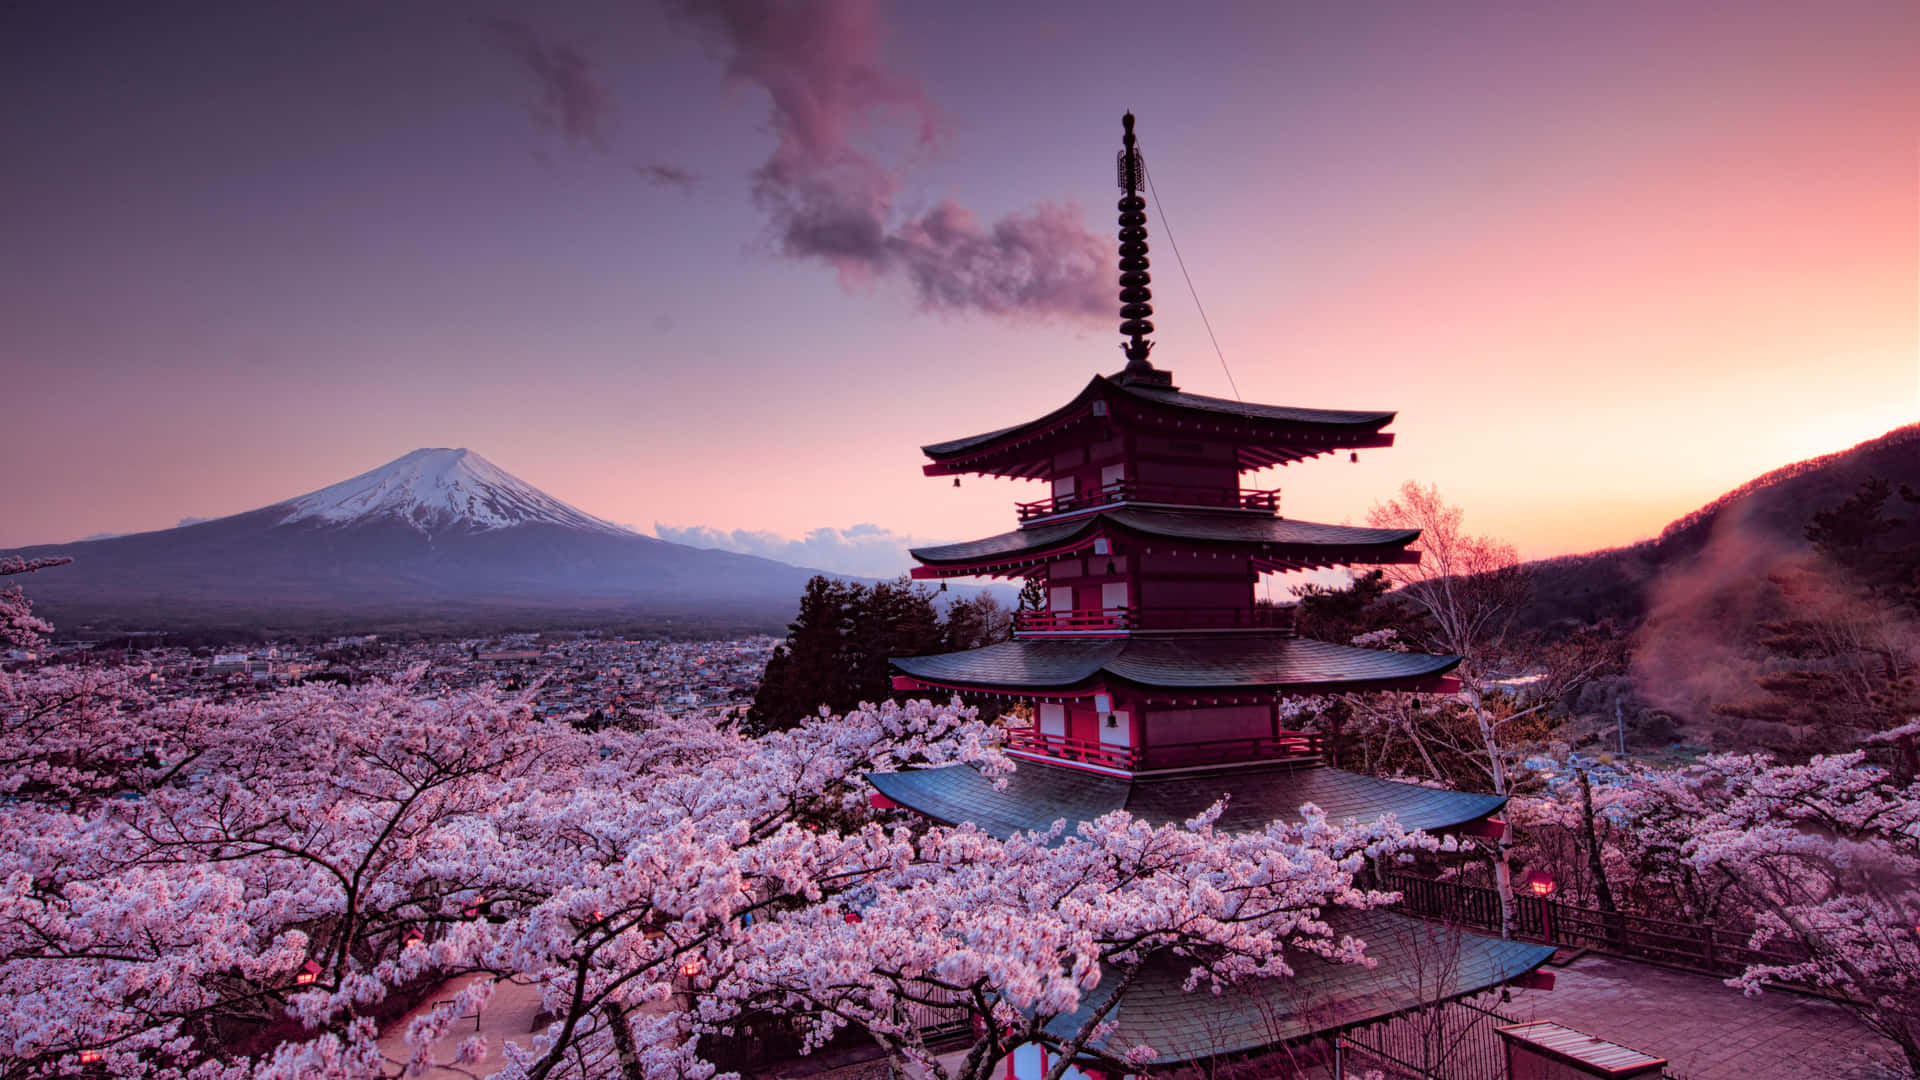 A Pagoda With Cherry Blossoms And A Mountain In The Background Wallpaper